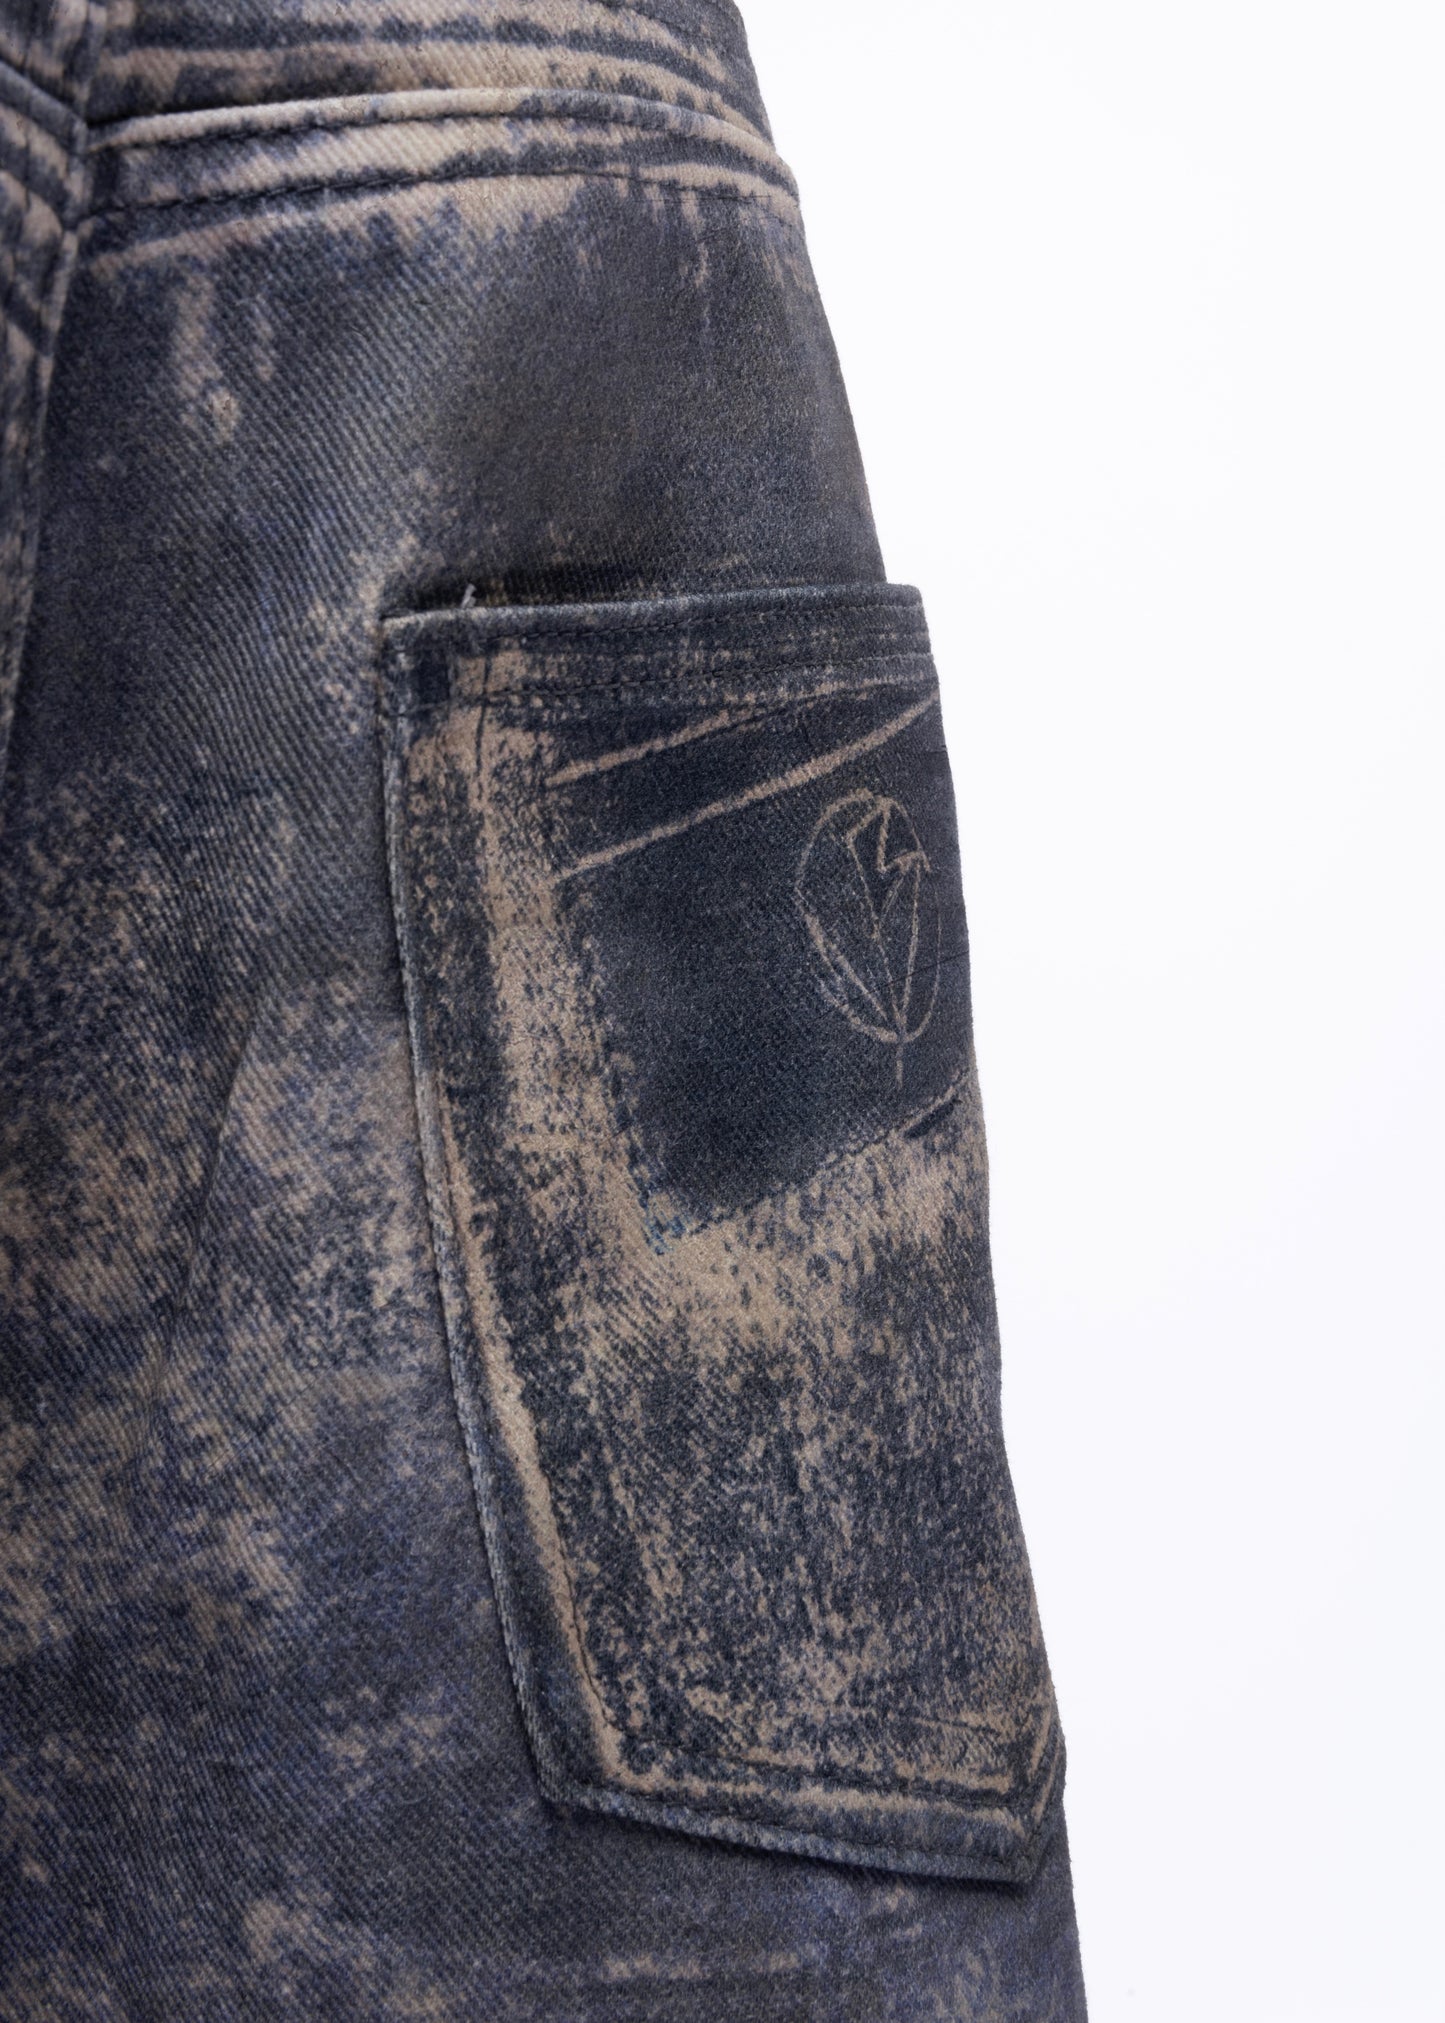 WHAT’S IN MY POCKET DENIM USED BLUE